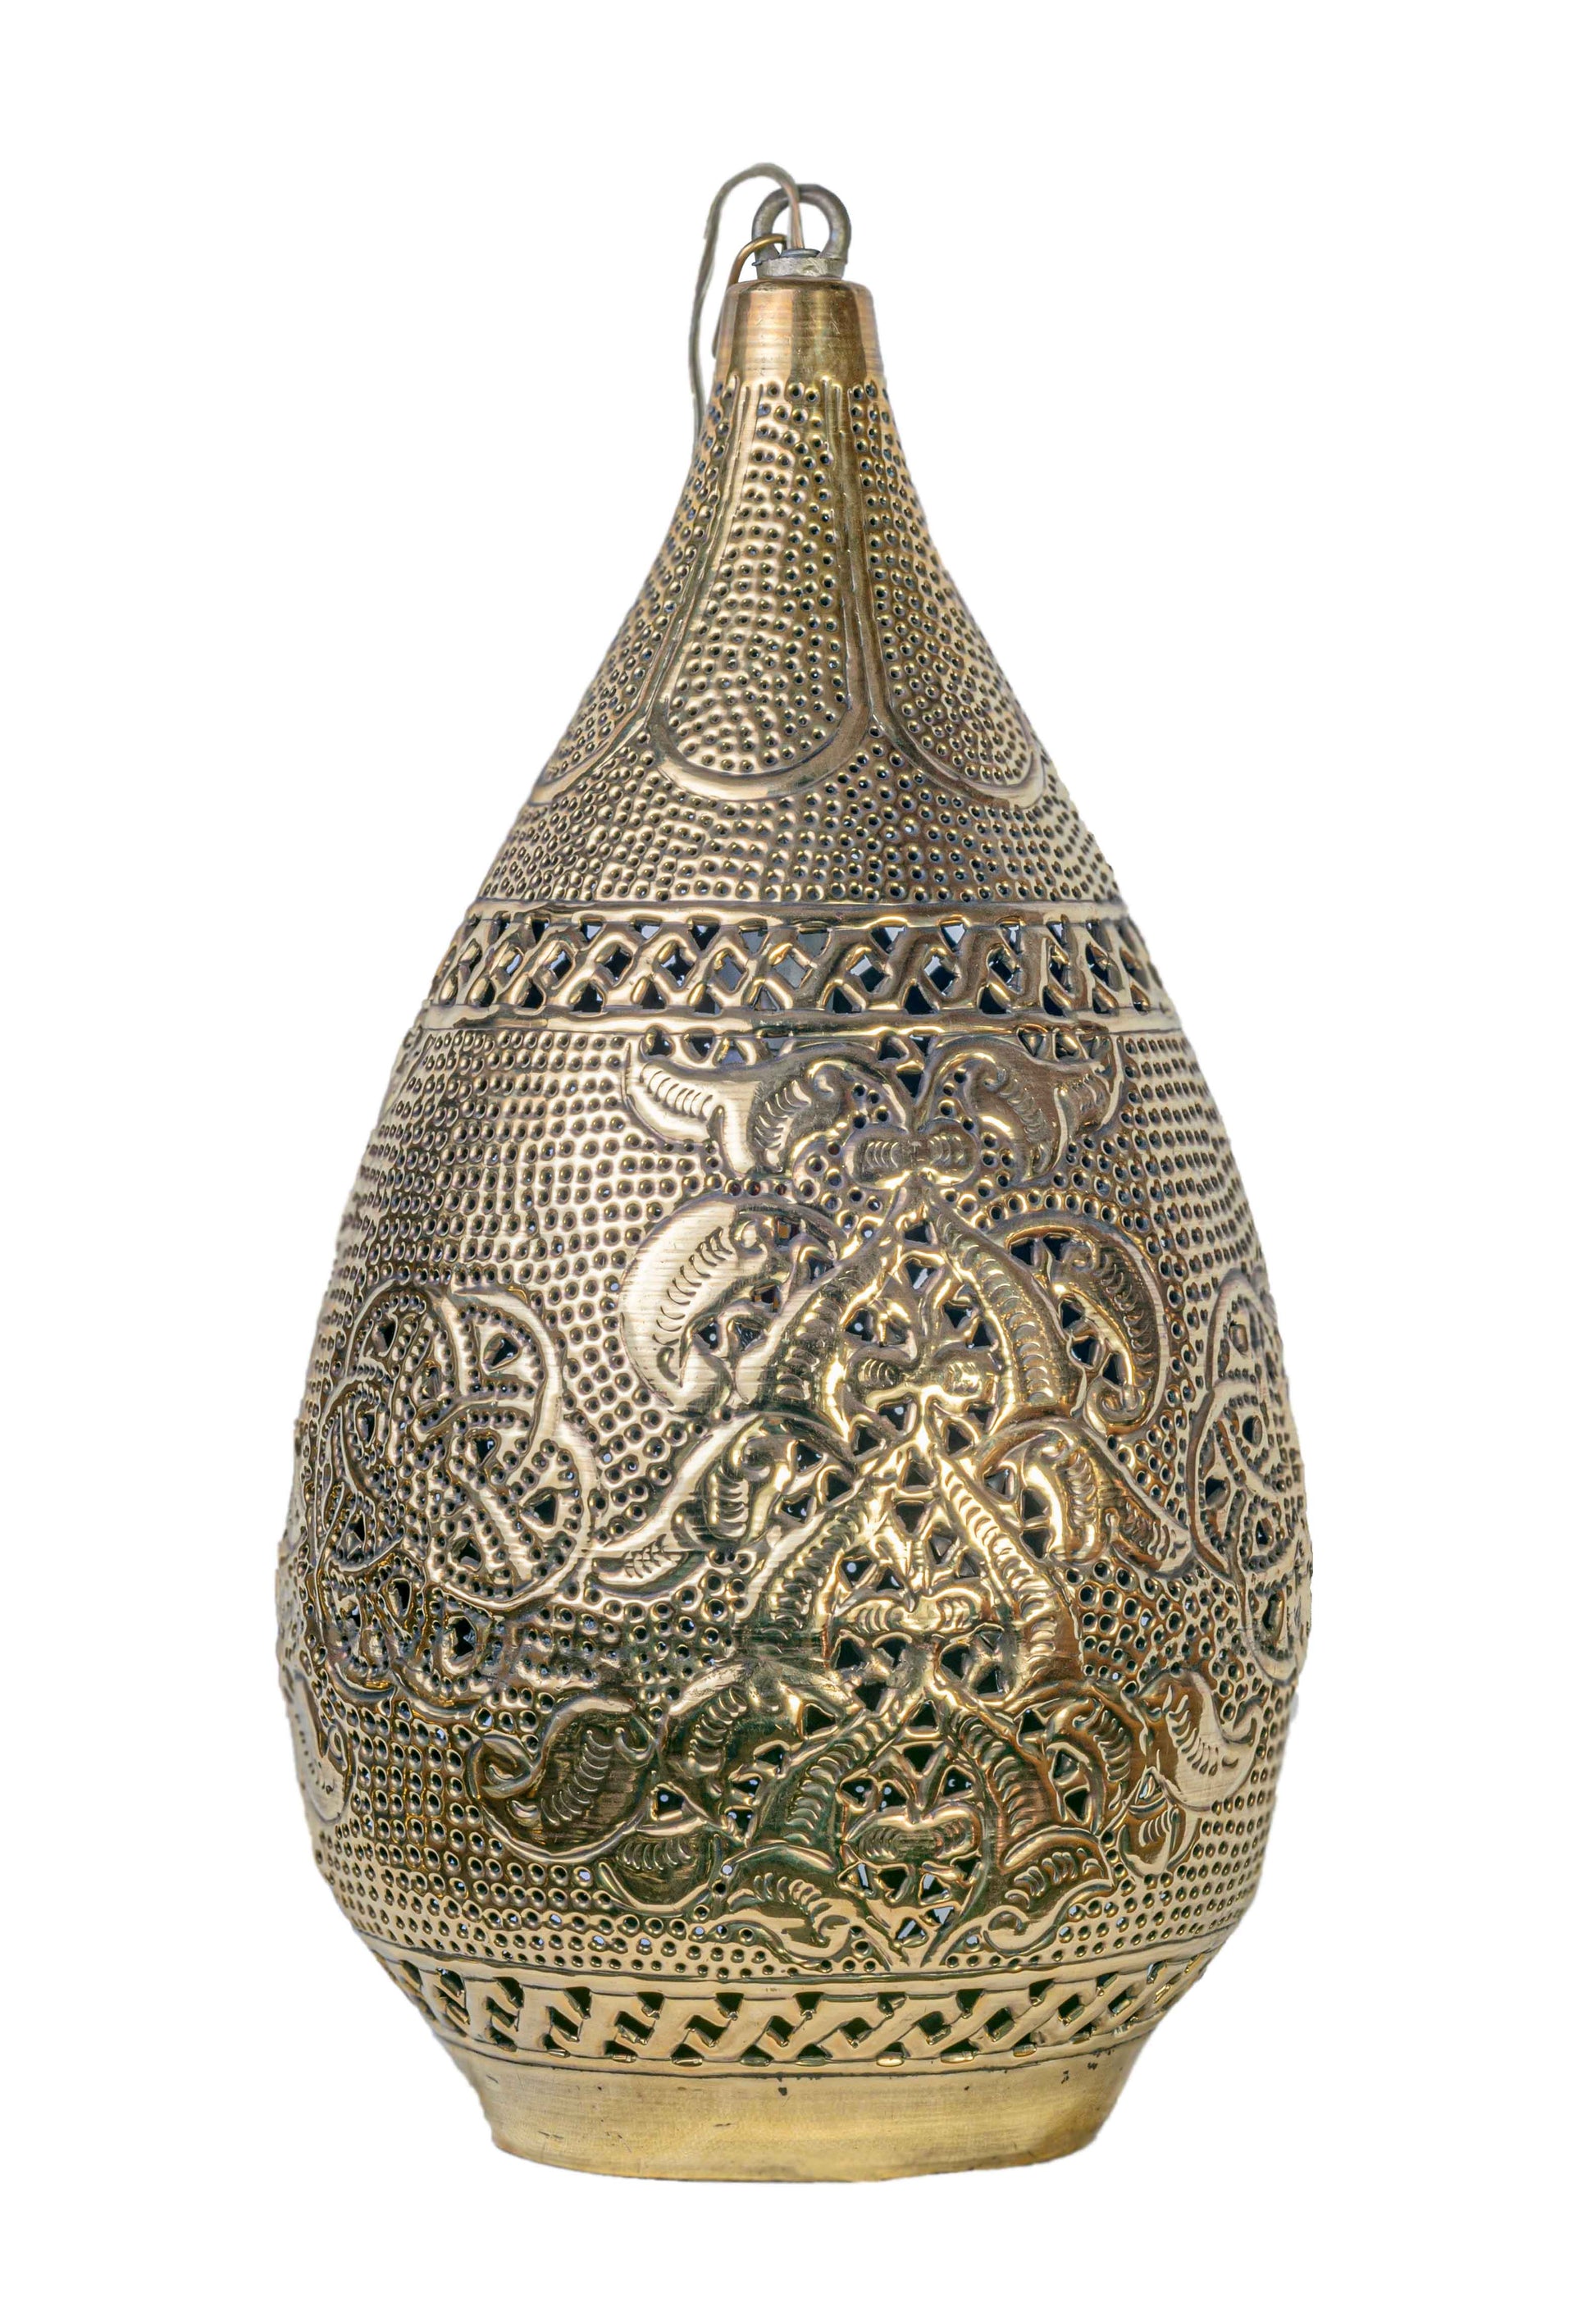 Moroccan Lamp | Flower Palace - Moroccan Lamps